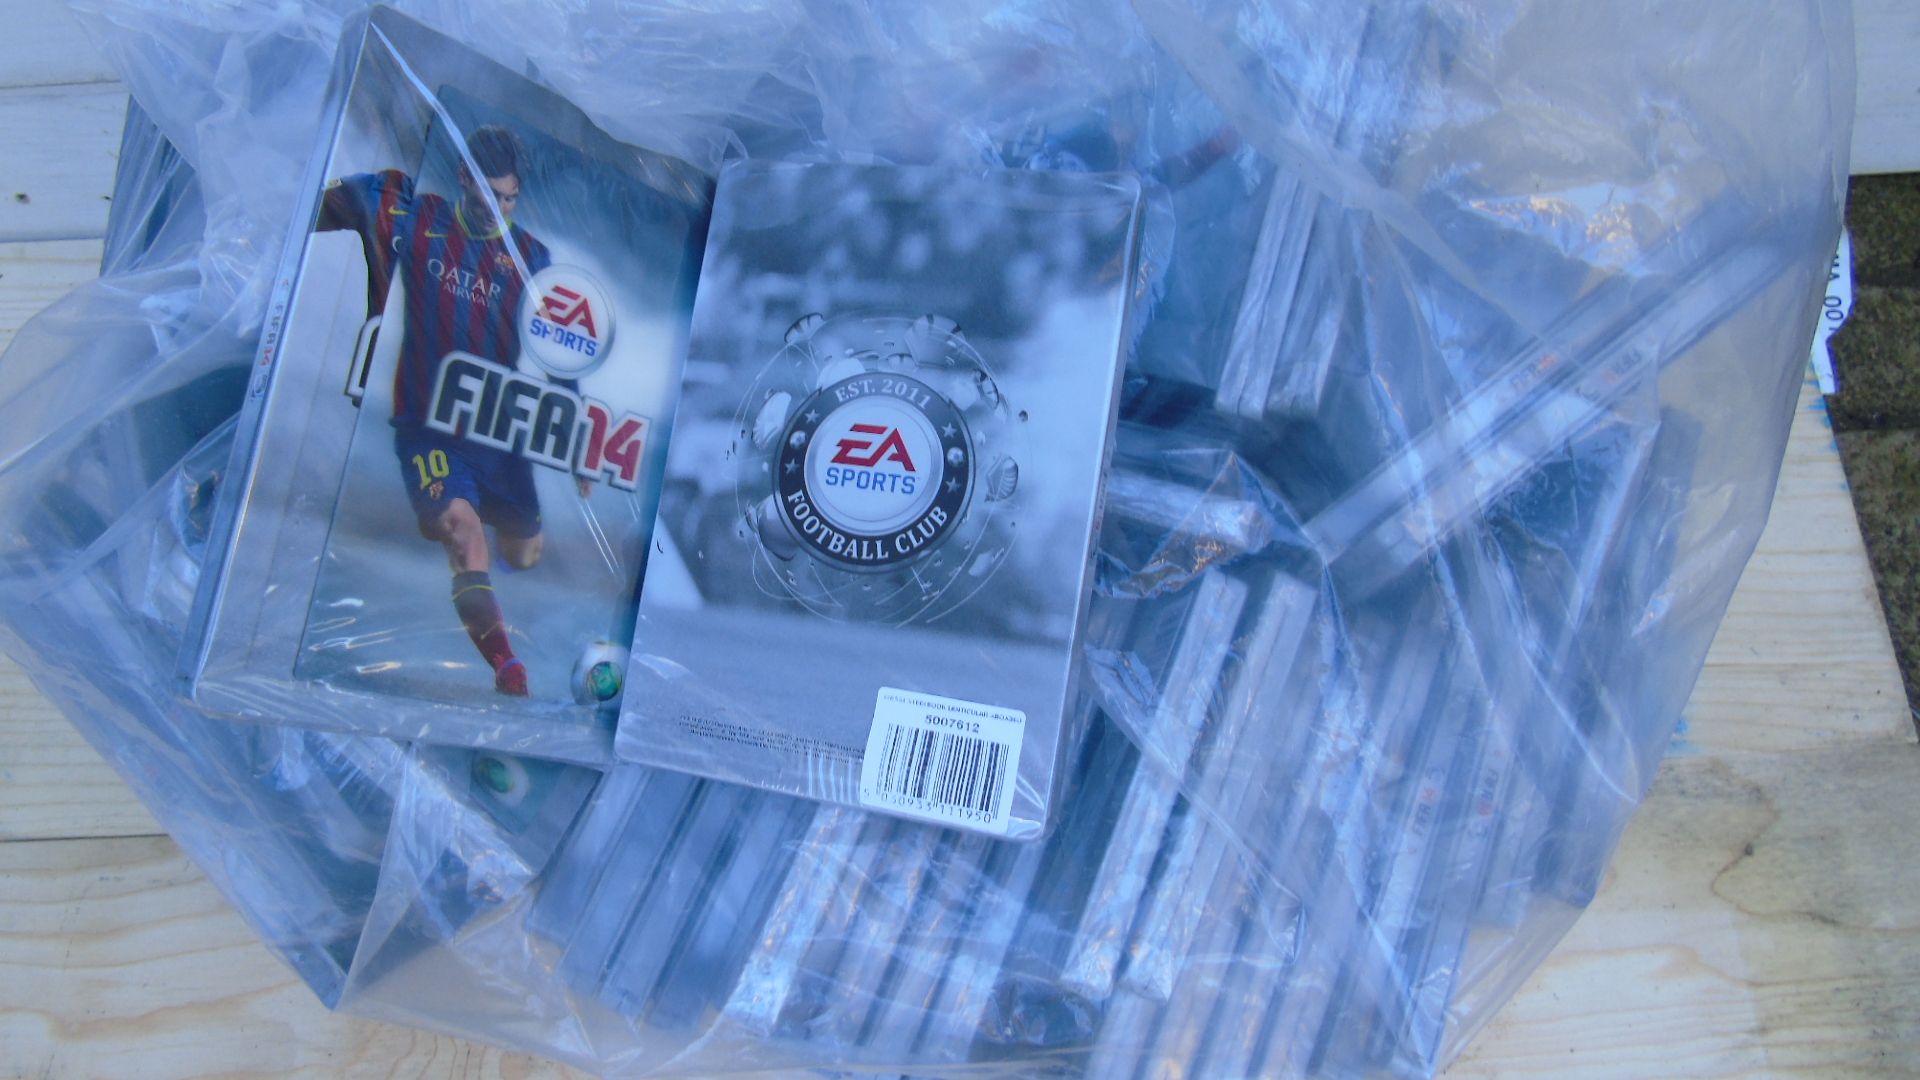 No Reserve: Approx 55 x Fifa 14 - Messi. Metal game cases (games are not included)